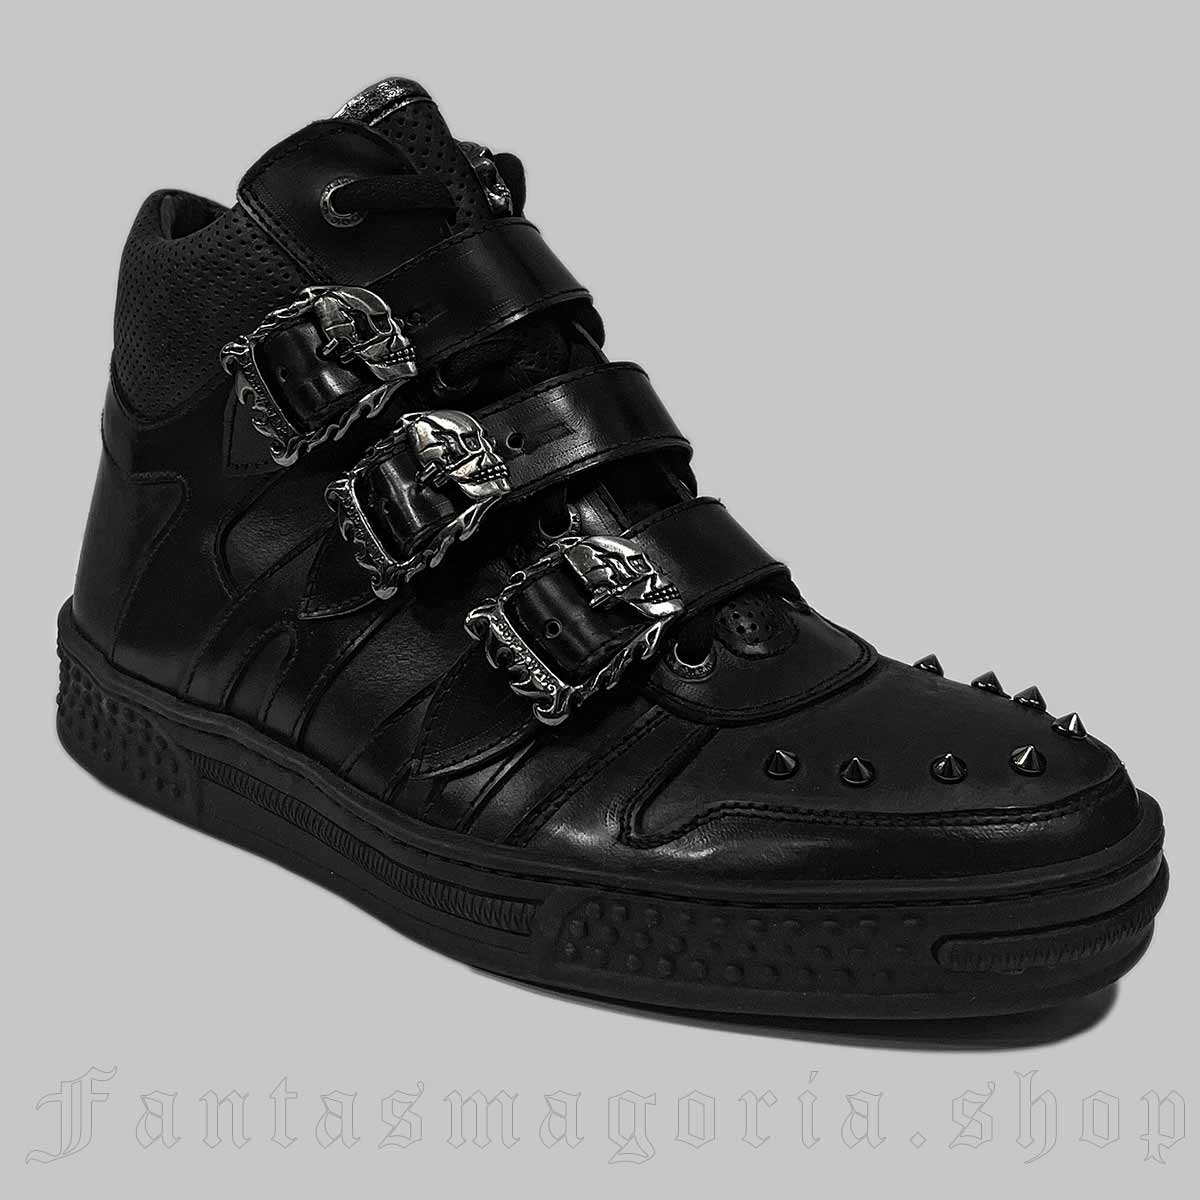 Women's Punk natural black leather three skull buckles high top sneakers. - New Rock - PSX01-R2